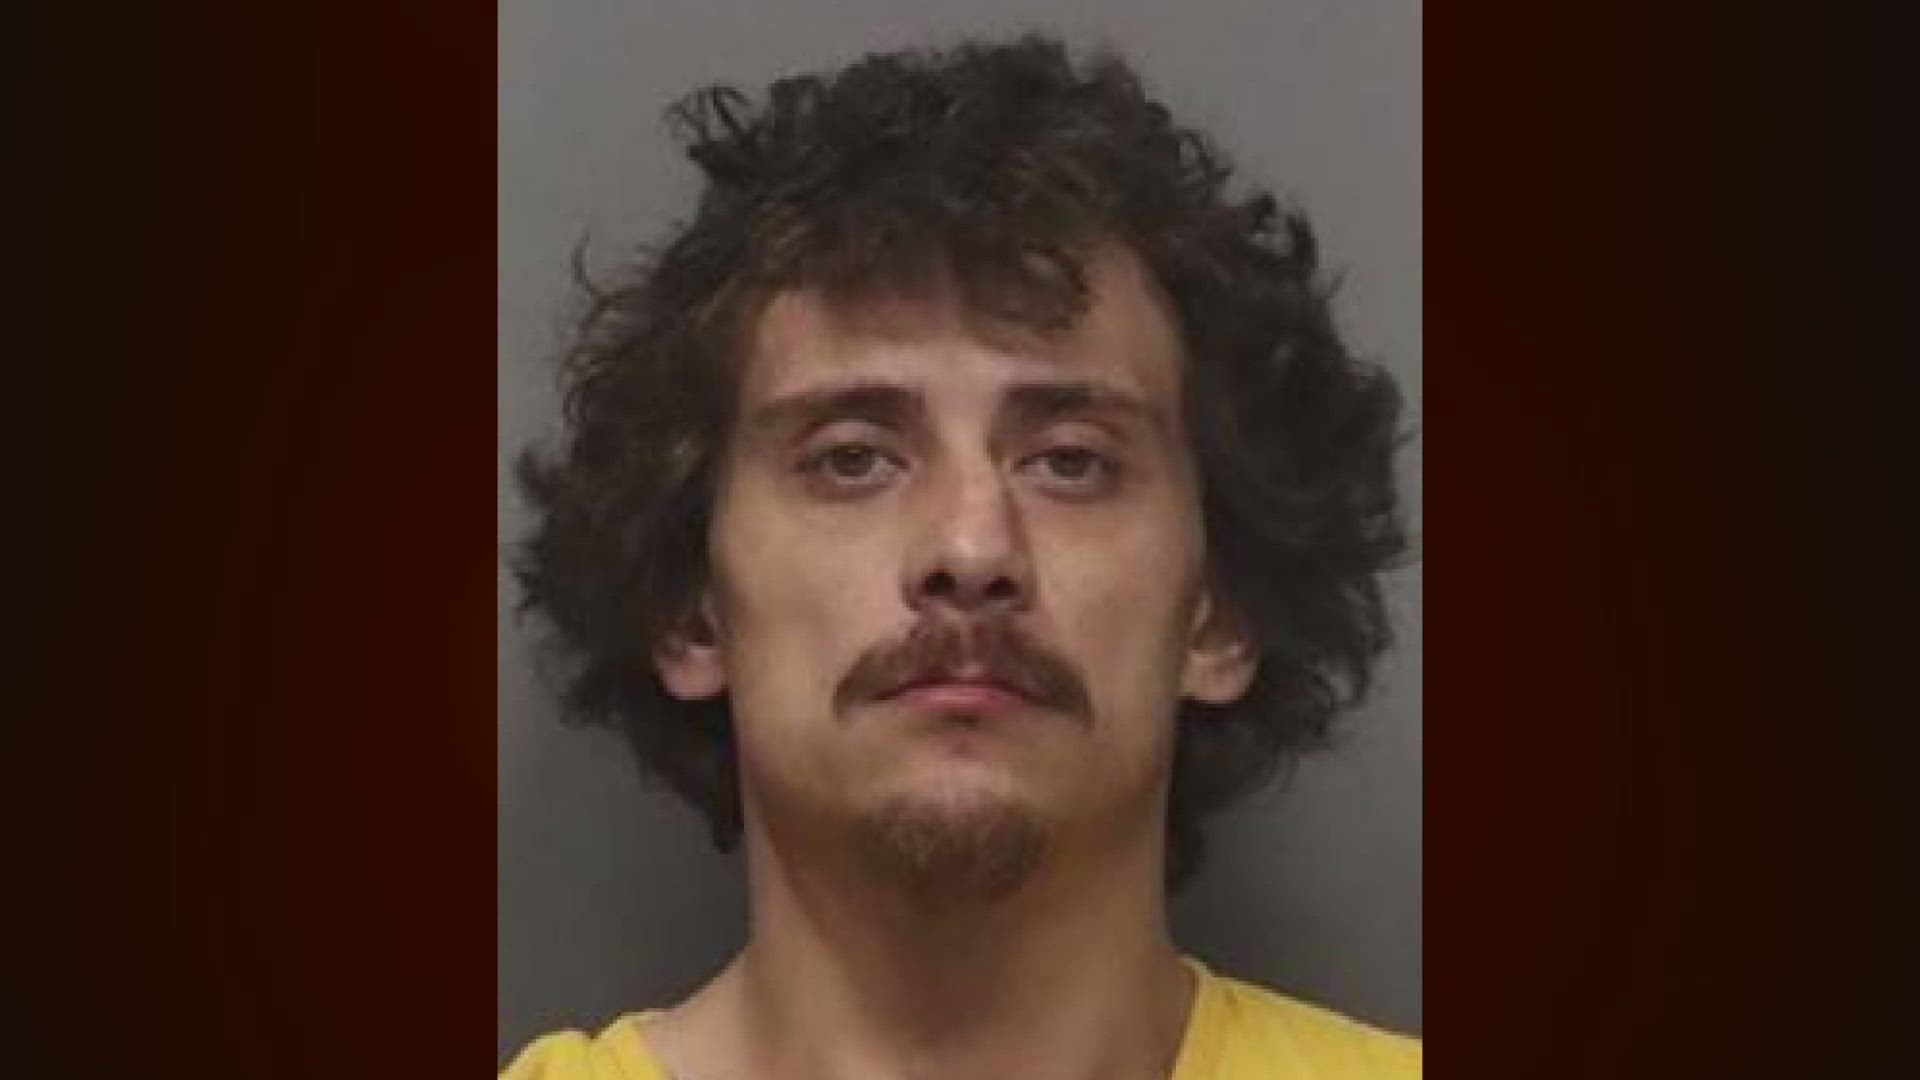 Twenty-seven-year-old suspect Ryan P. Todd has extensive criminal history with prior felony convictions for eluding police and third-degree assault.